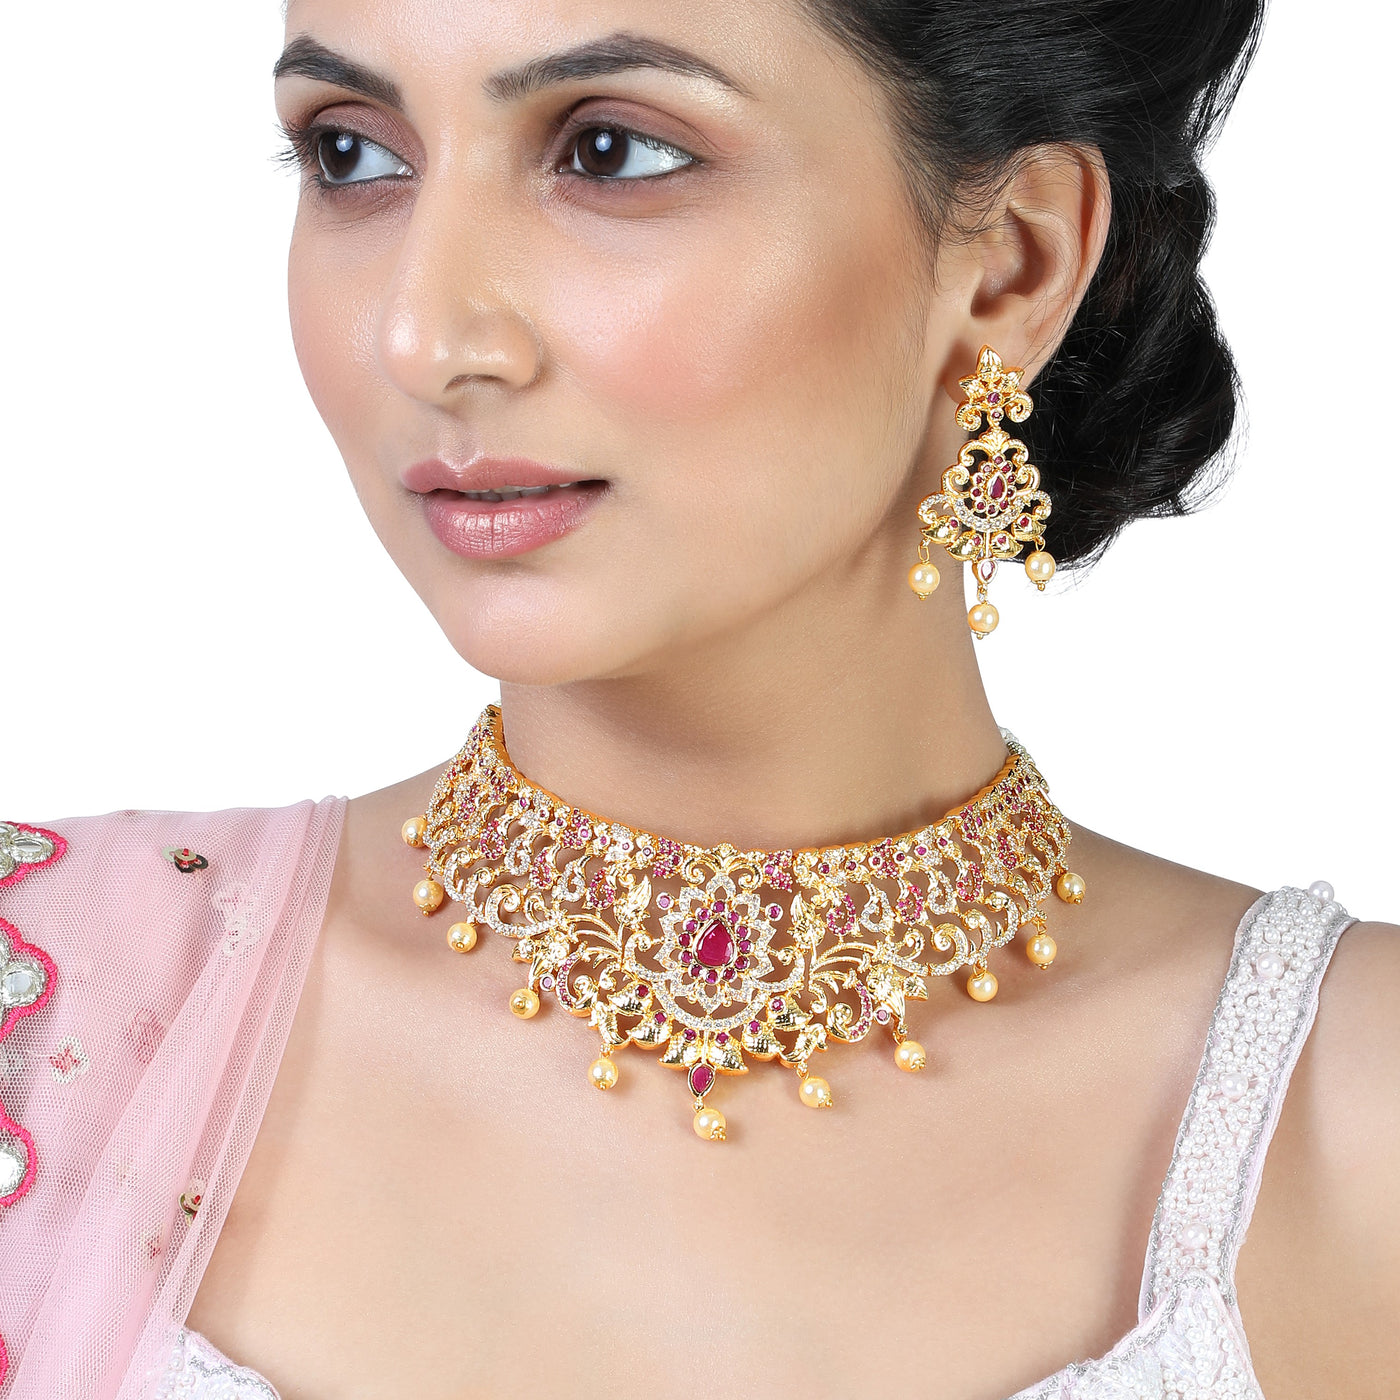 Estele Gold Plated CZ Magnificent Bridal Choker Necklace Set with Colored Stones & Pearls for Women